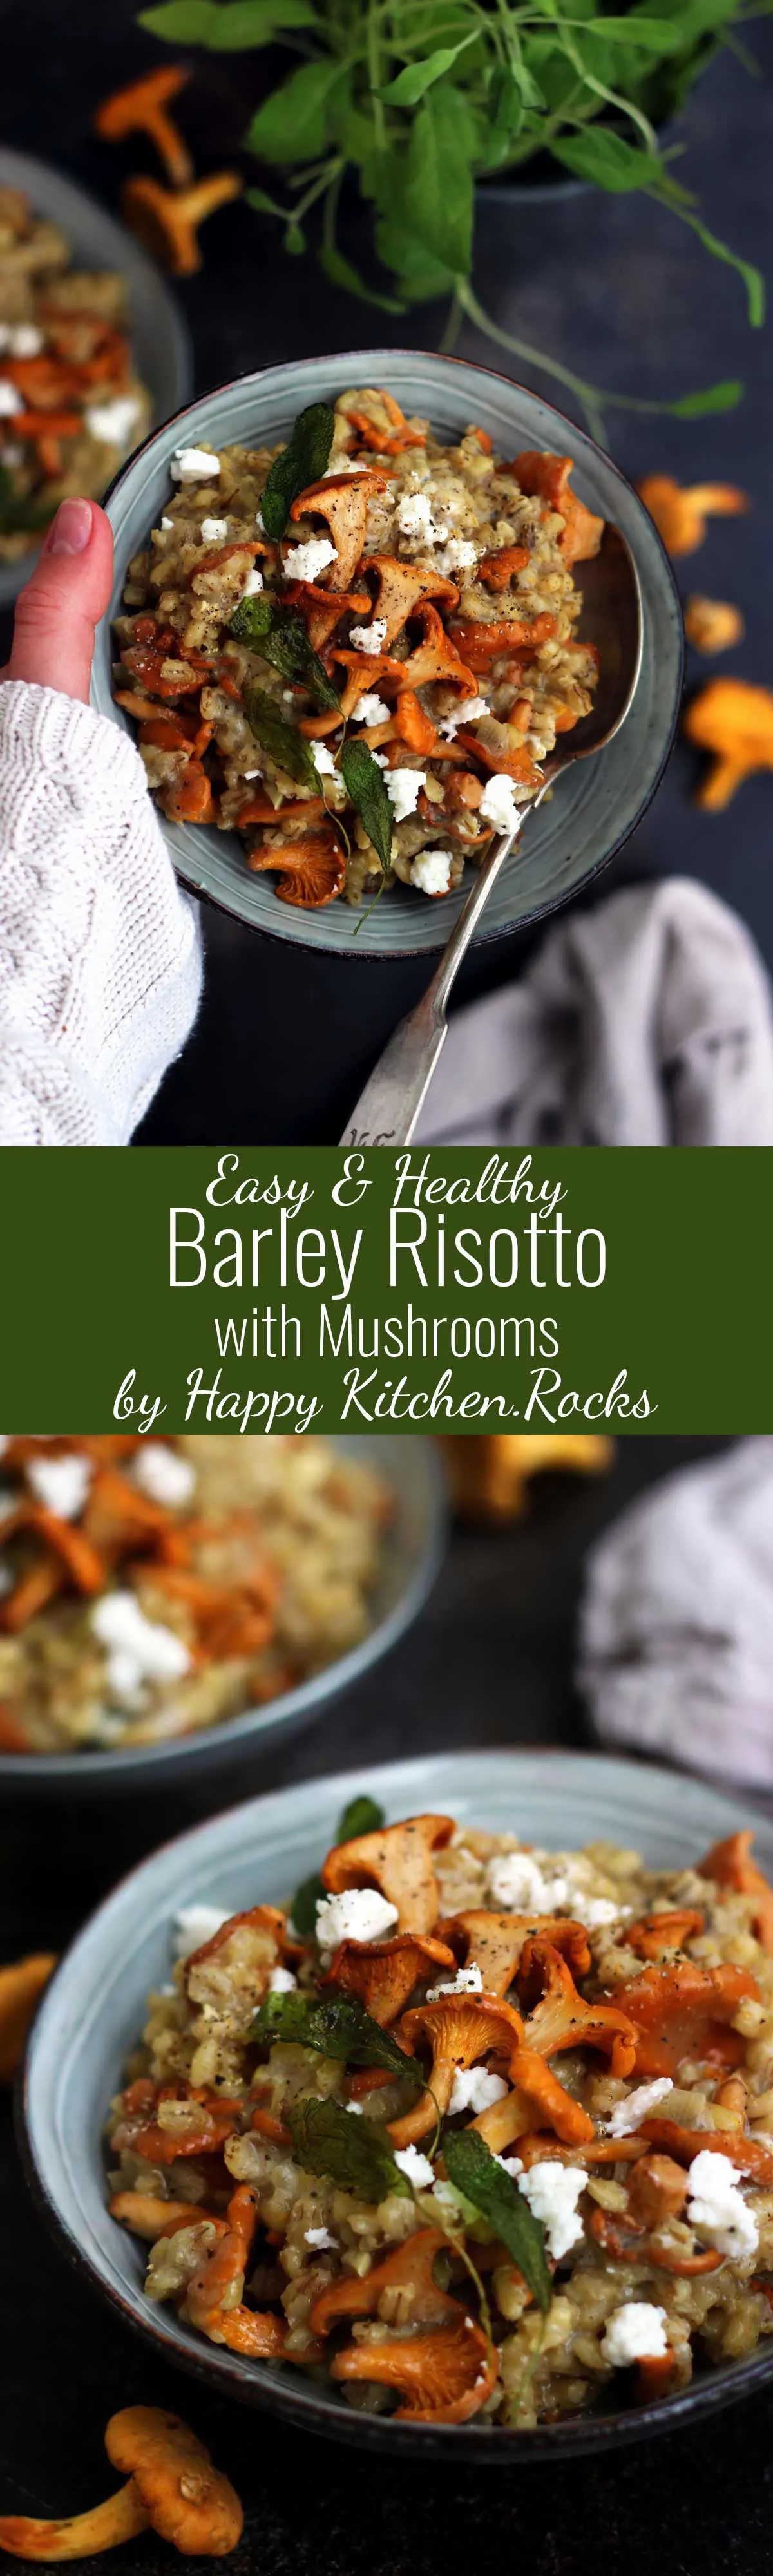 Easy Barley Risotto with Mushroom and Goat Cheese Super Long Collage with Two Images and Text Overlay